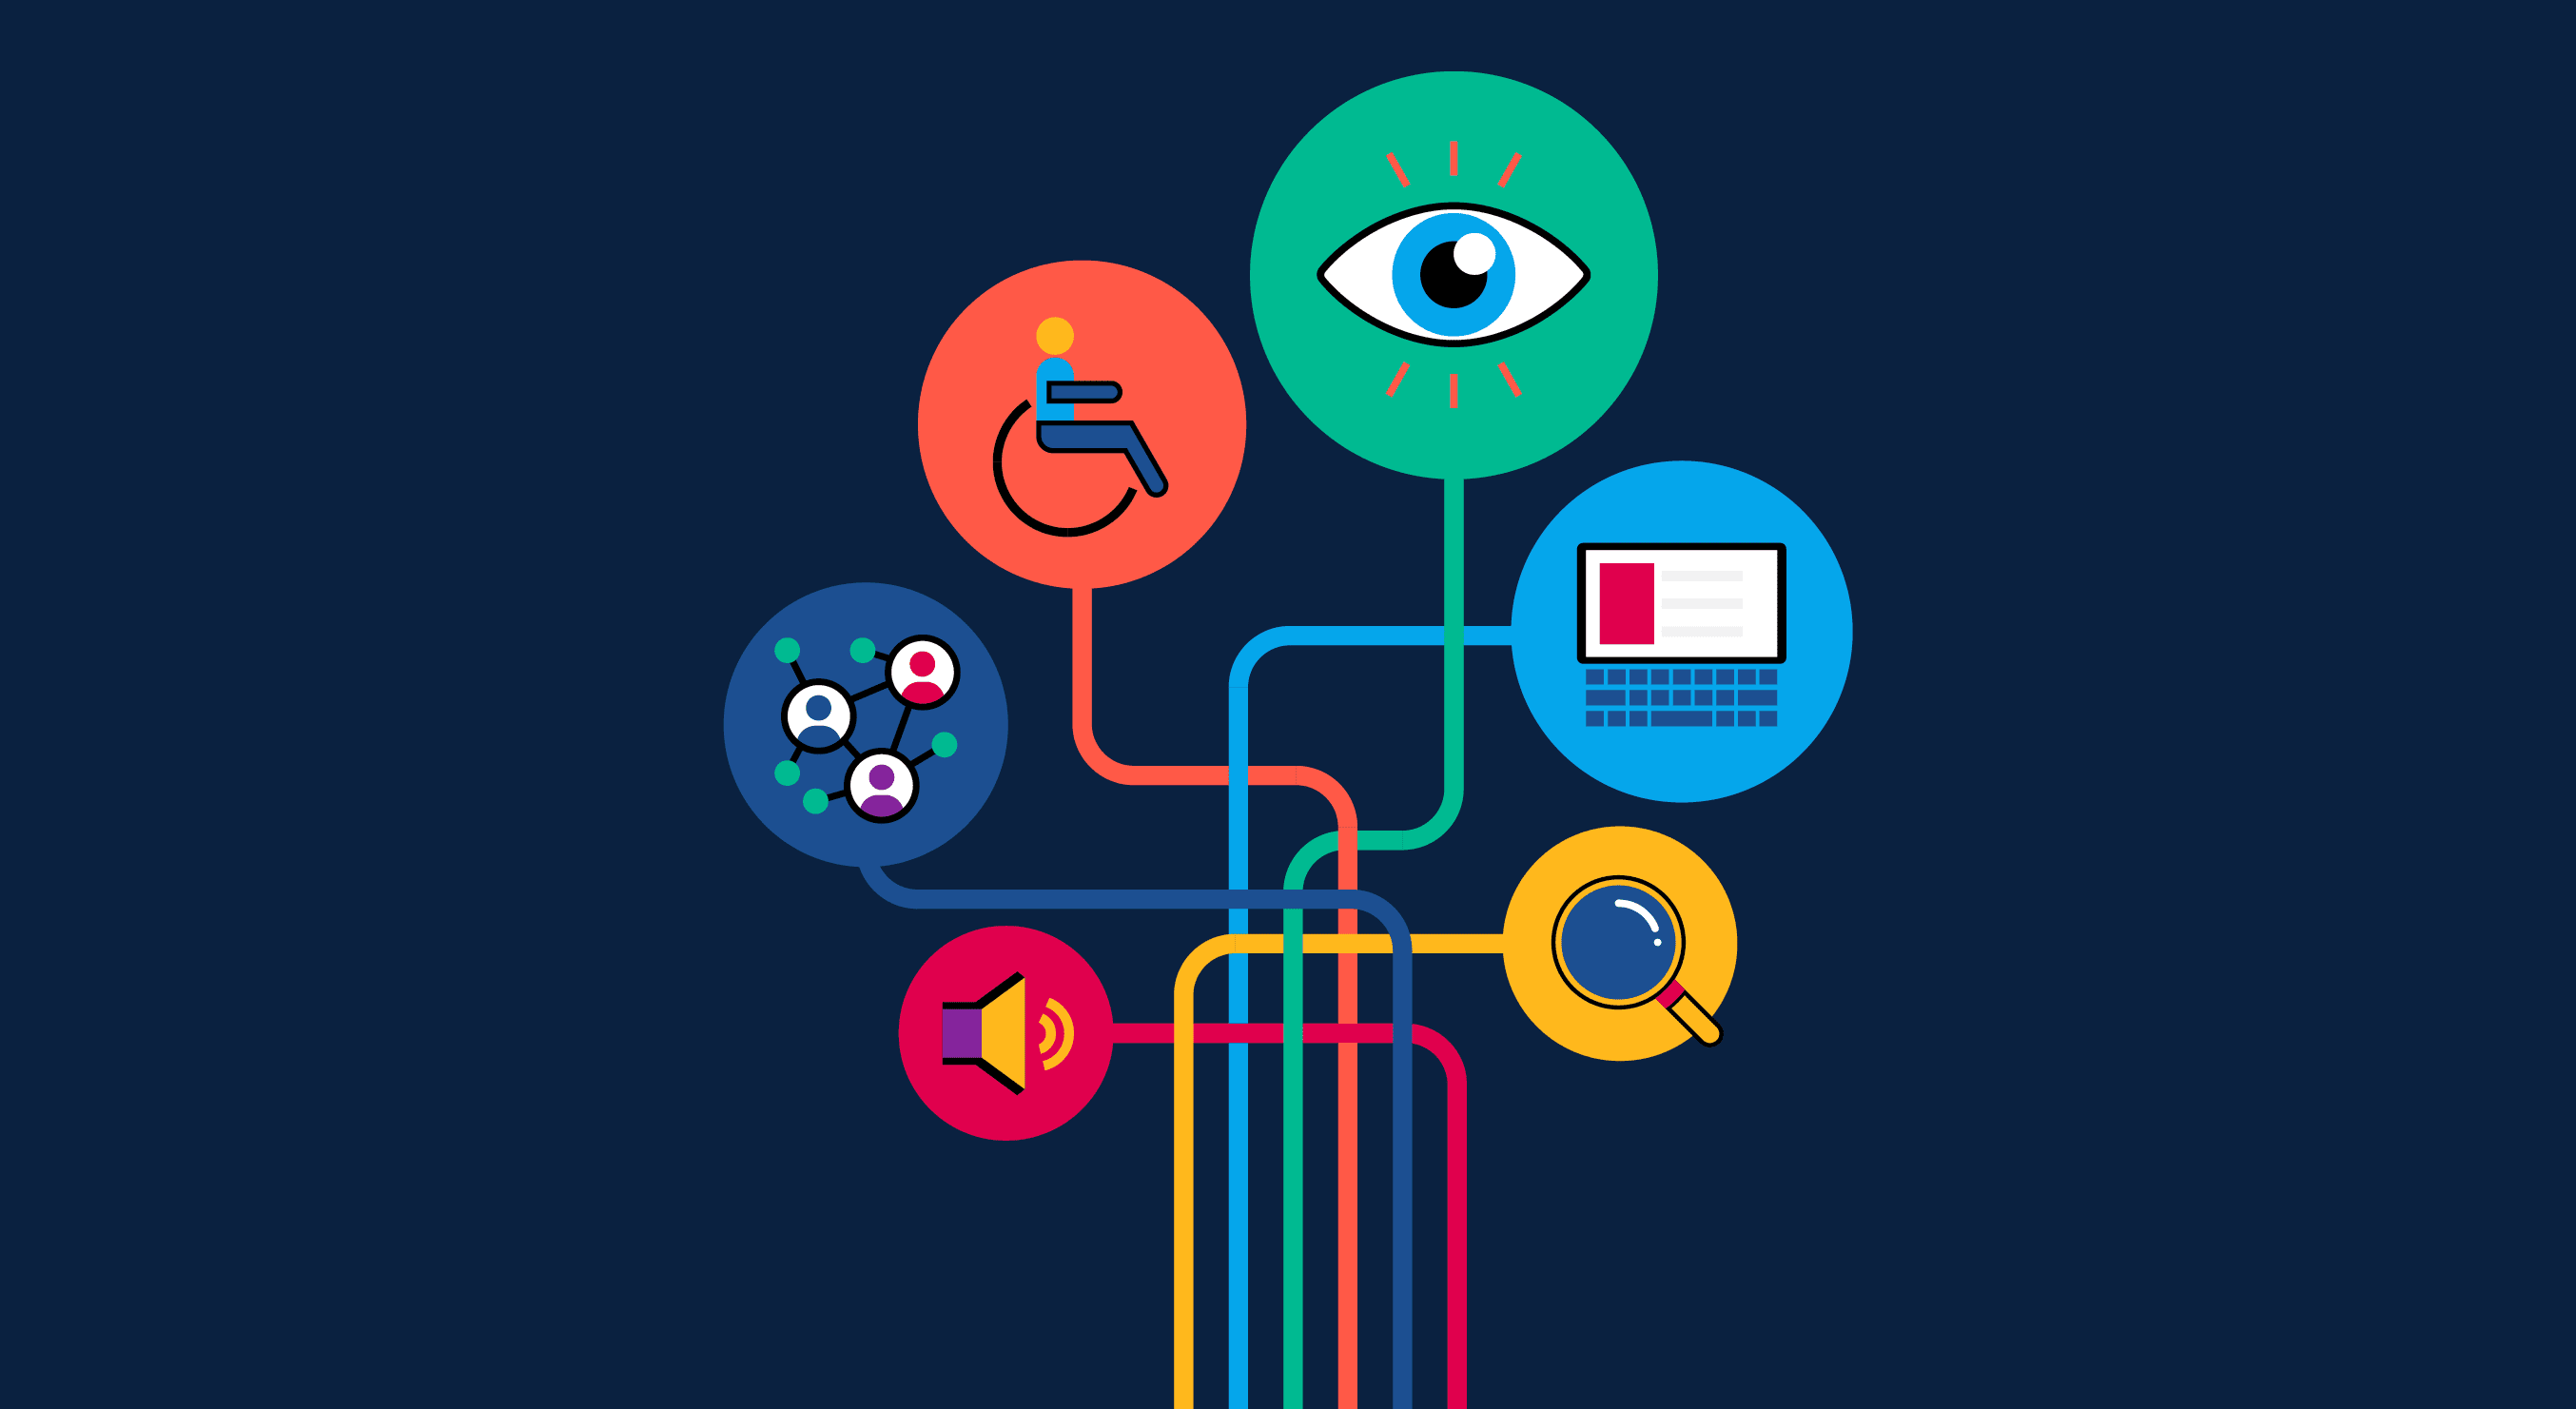 A graphic showing six icons denoting different types of accessible content: magnifying glass, computer, eye, wheelchair, network of people, speaker.